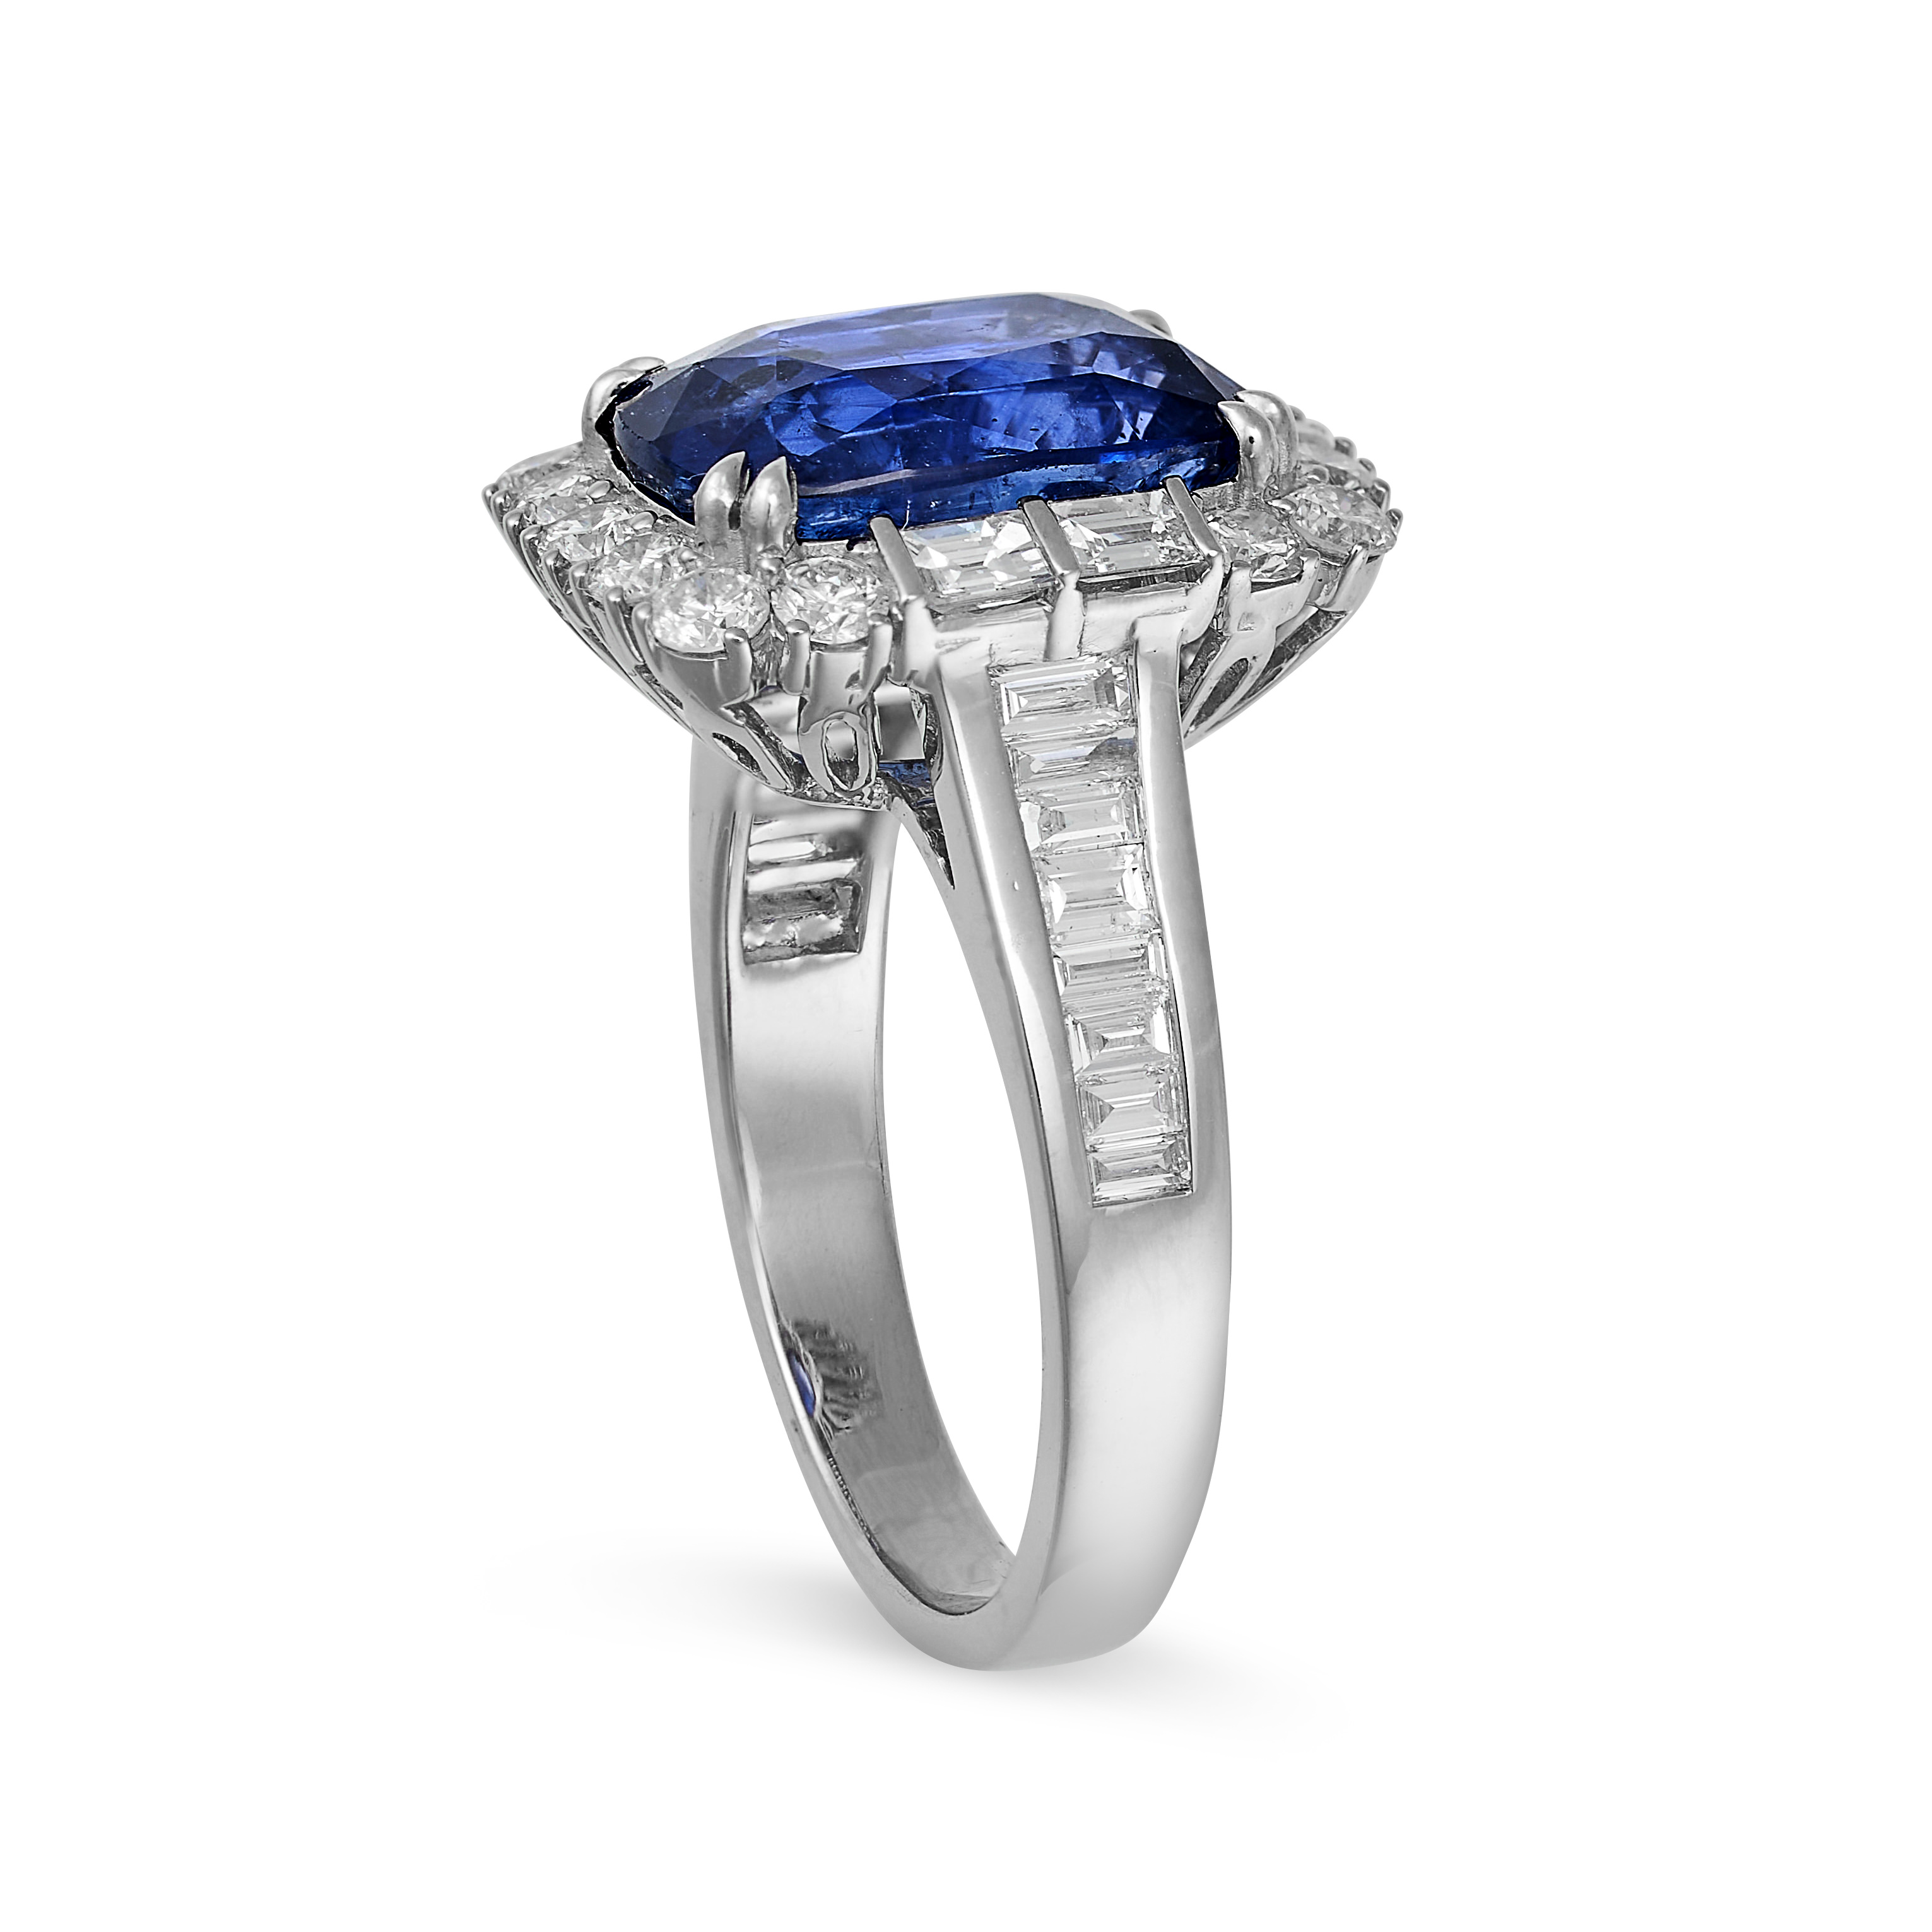 A SAPPHIRE AND DIAMOND DRESS RING in 18ct white gold, set with a cushion cut sapphire of 6.91 carats - Image 2 of 2